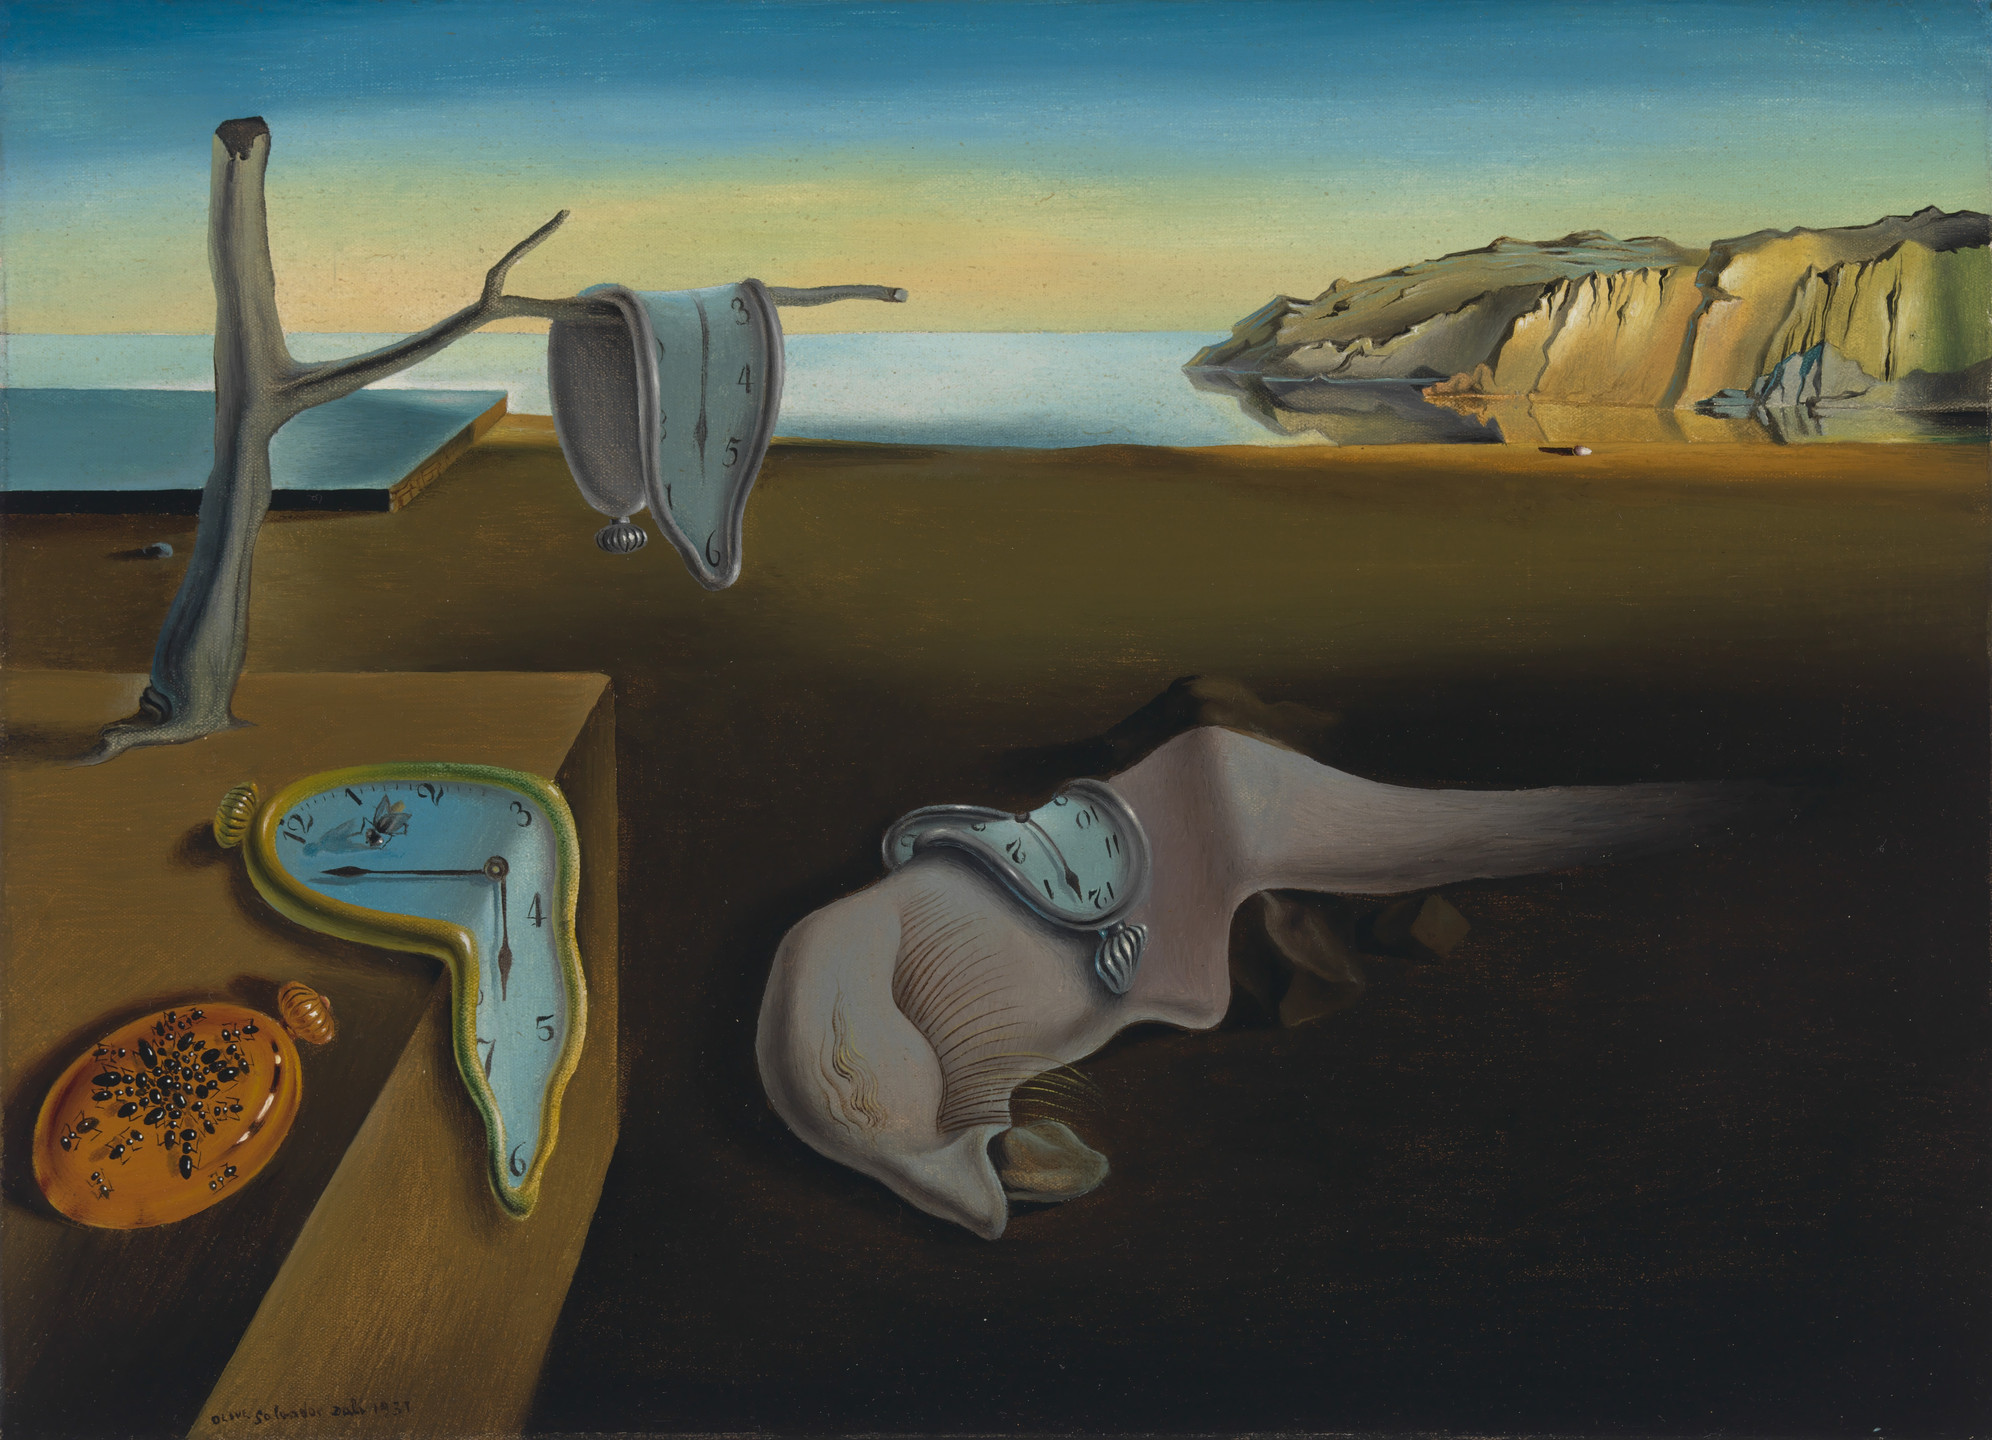 “The Persistence of Memory” 